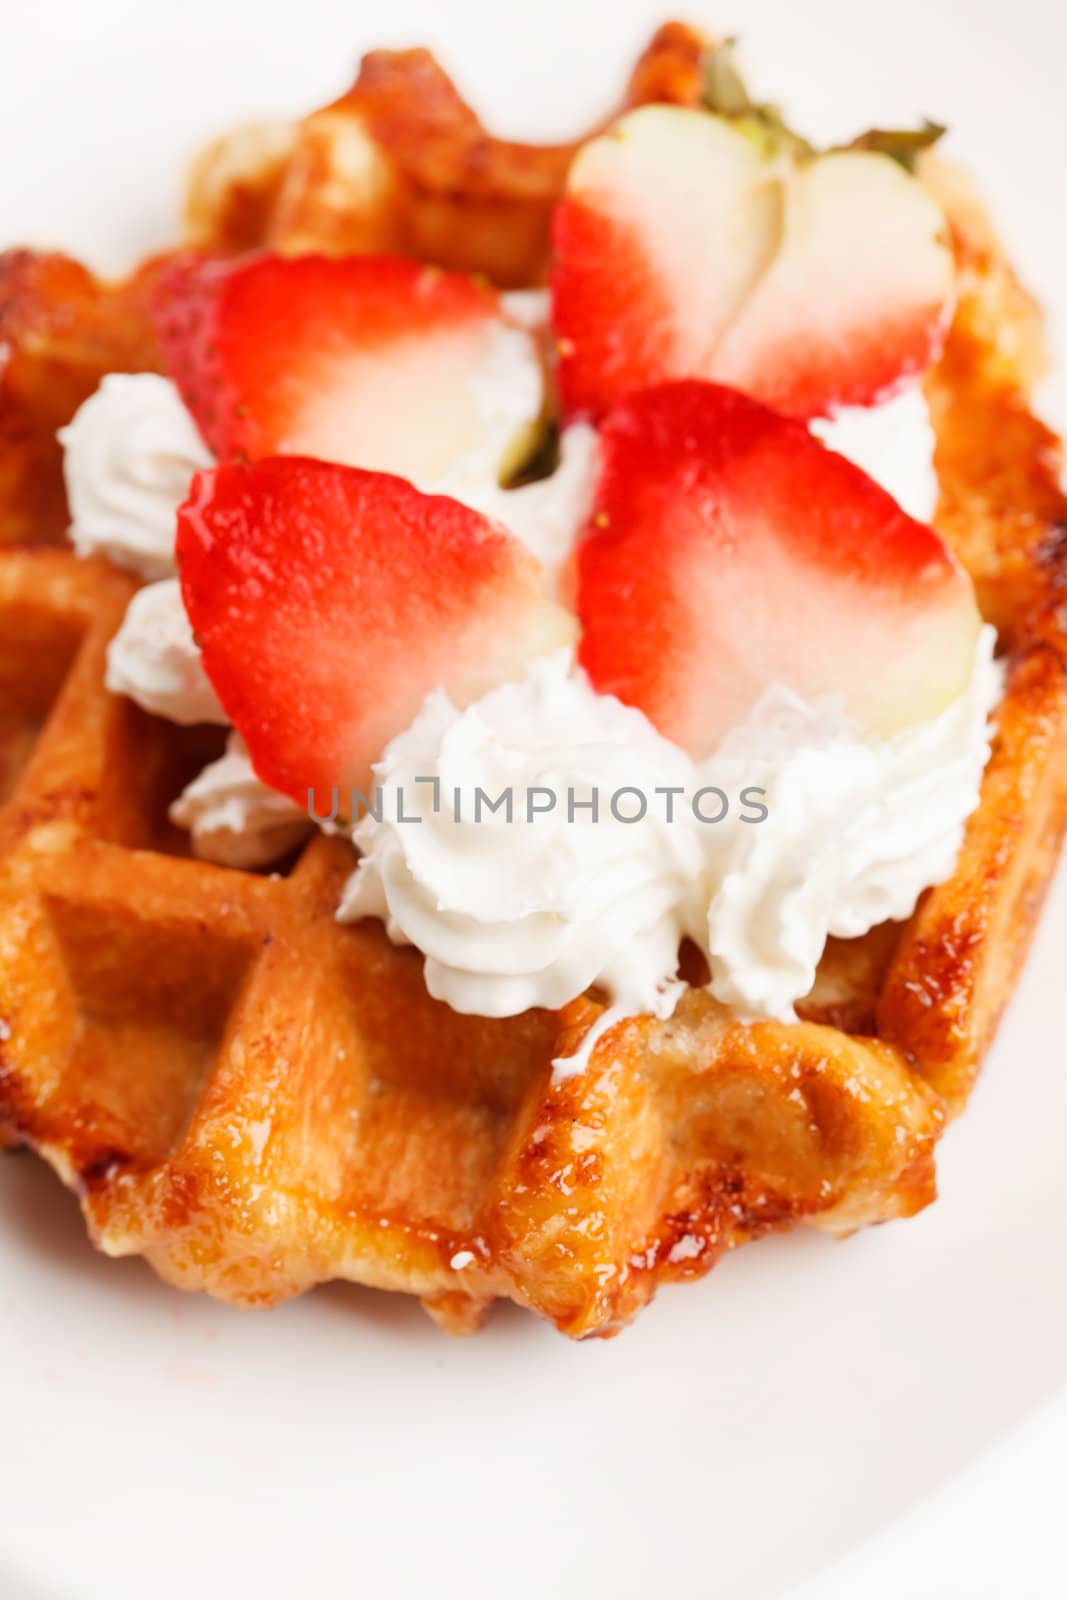 belgian waffles with fresh strawberries and whipped cream by shebeko